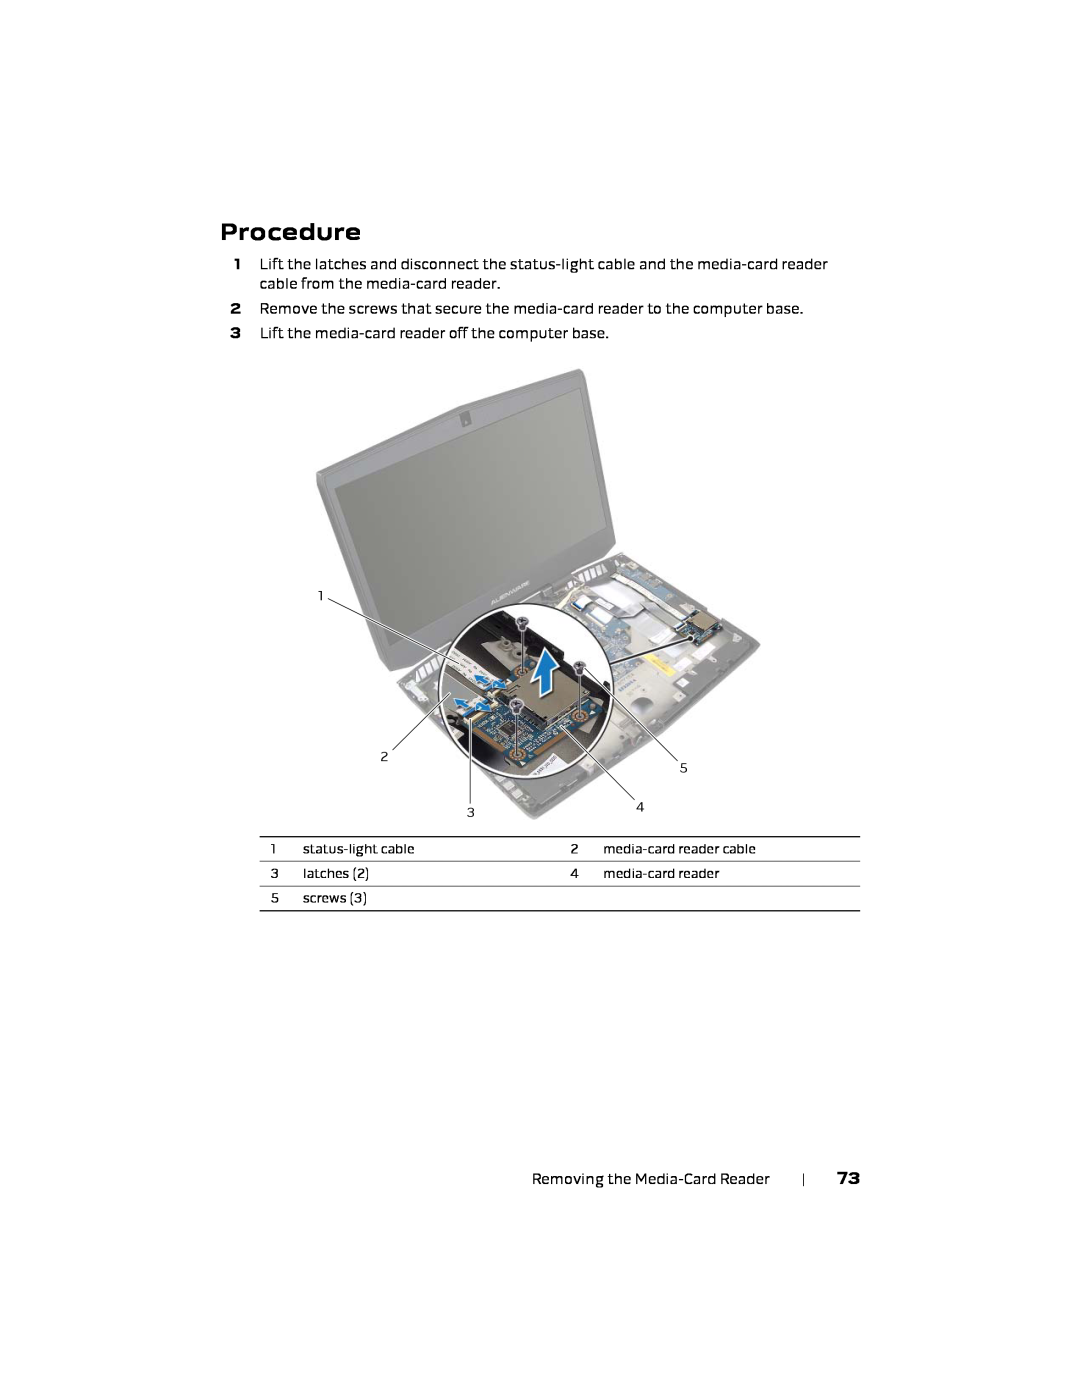 Alienware 17 R1, P18E owner manual Procedure, status-light cable, media-card reader cable, latches, screws 